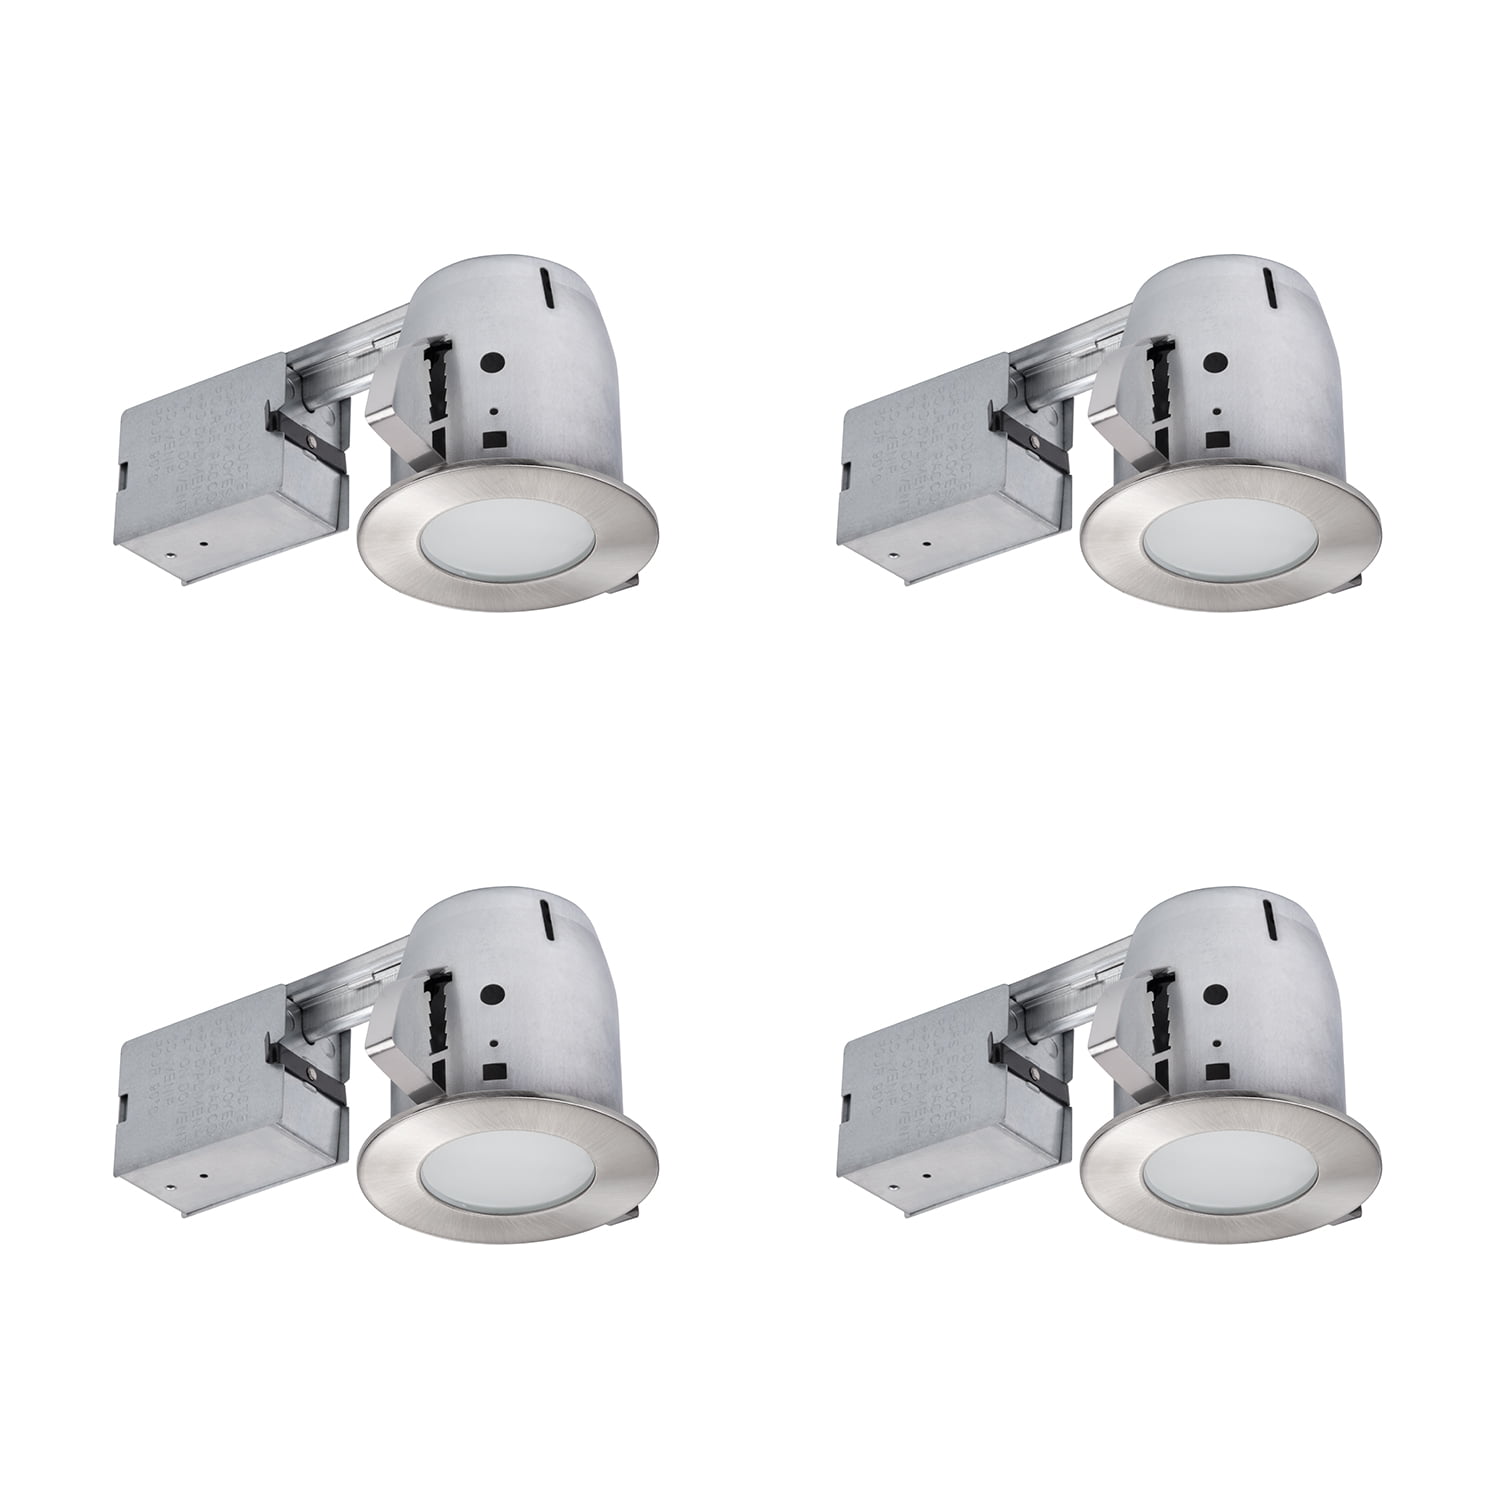 761 Globe 4 in White IC Rated Recessed Lighting Kit LED Bulb Included 